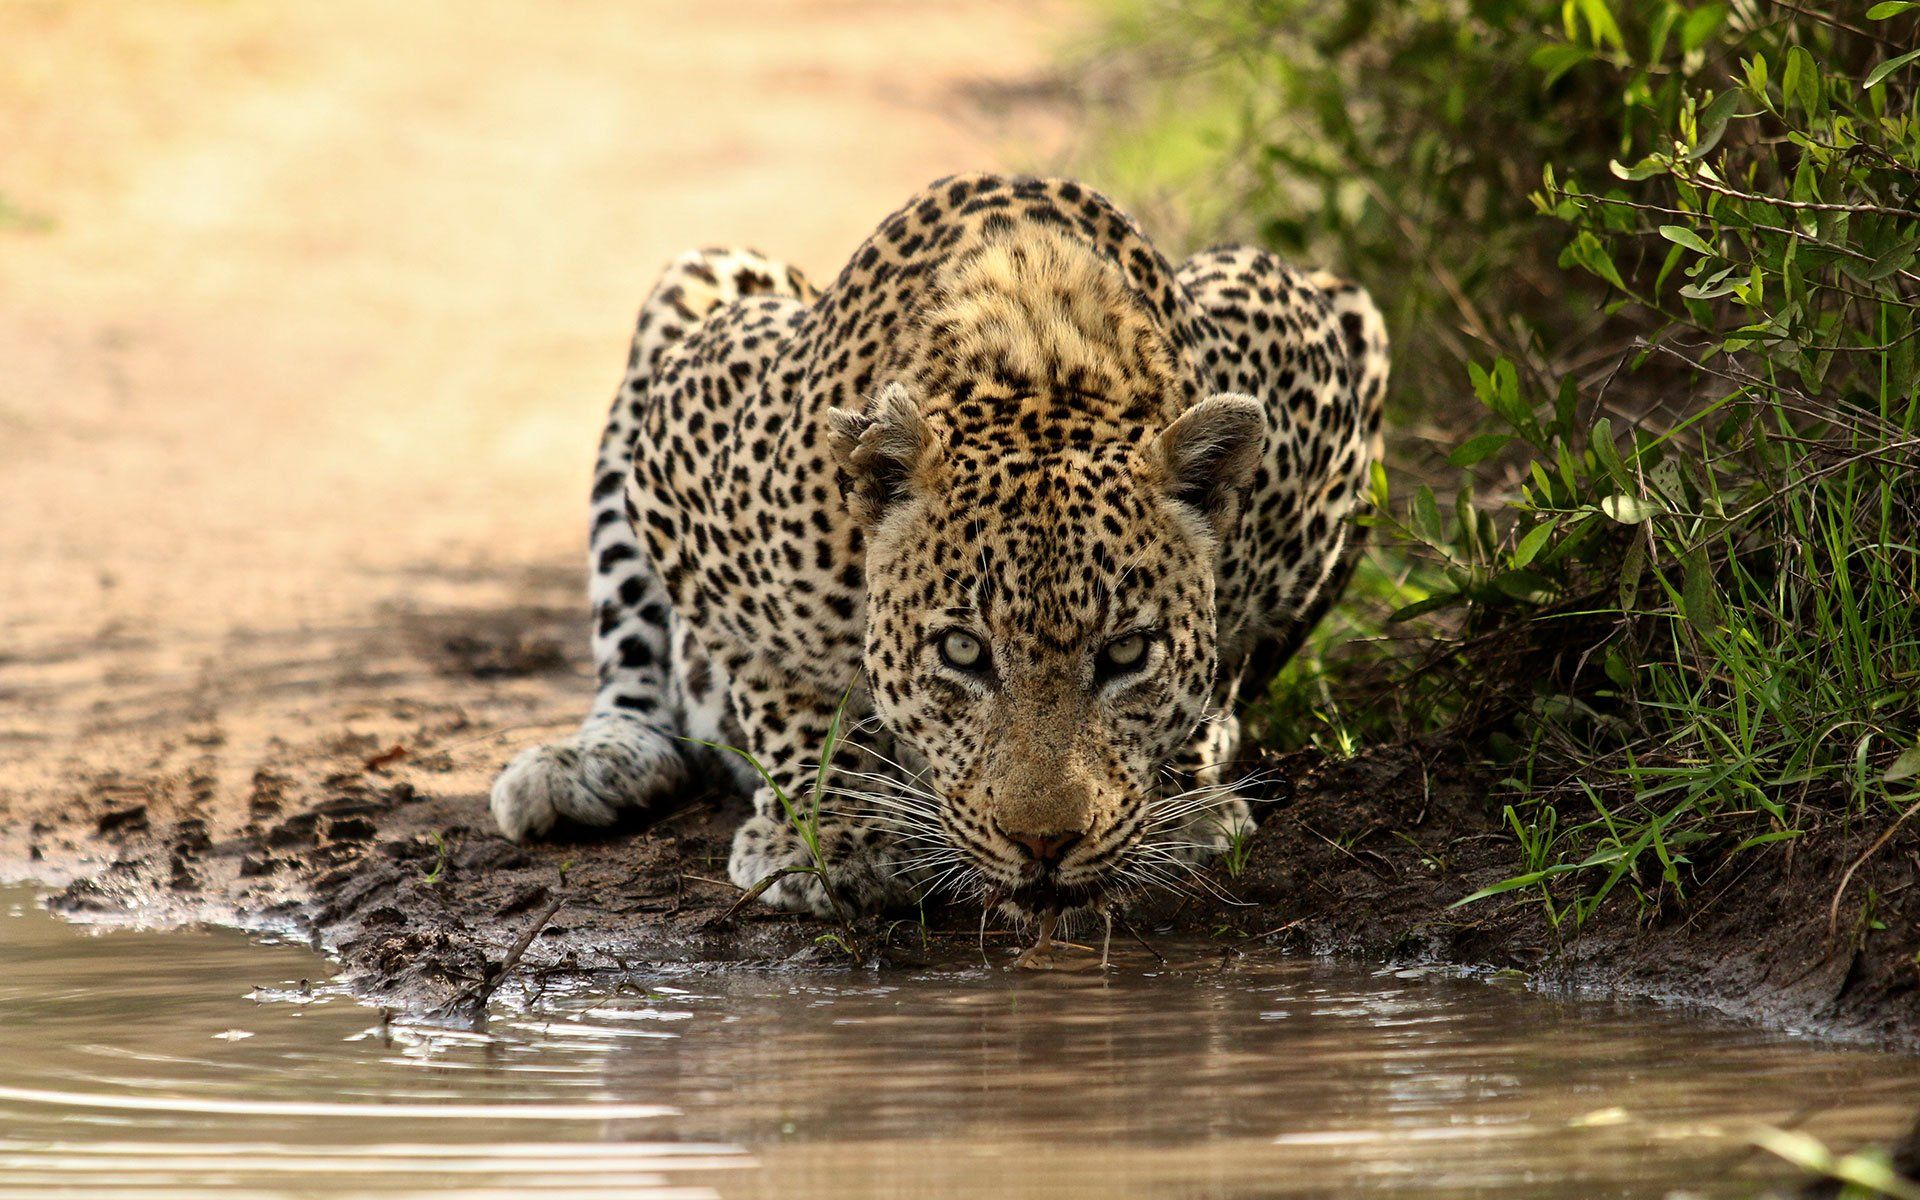 a leopard is drinking water from a muddy pond